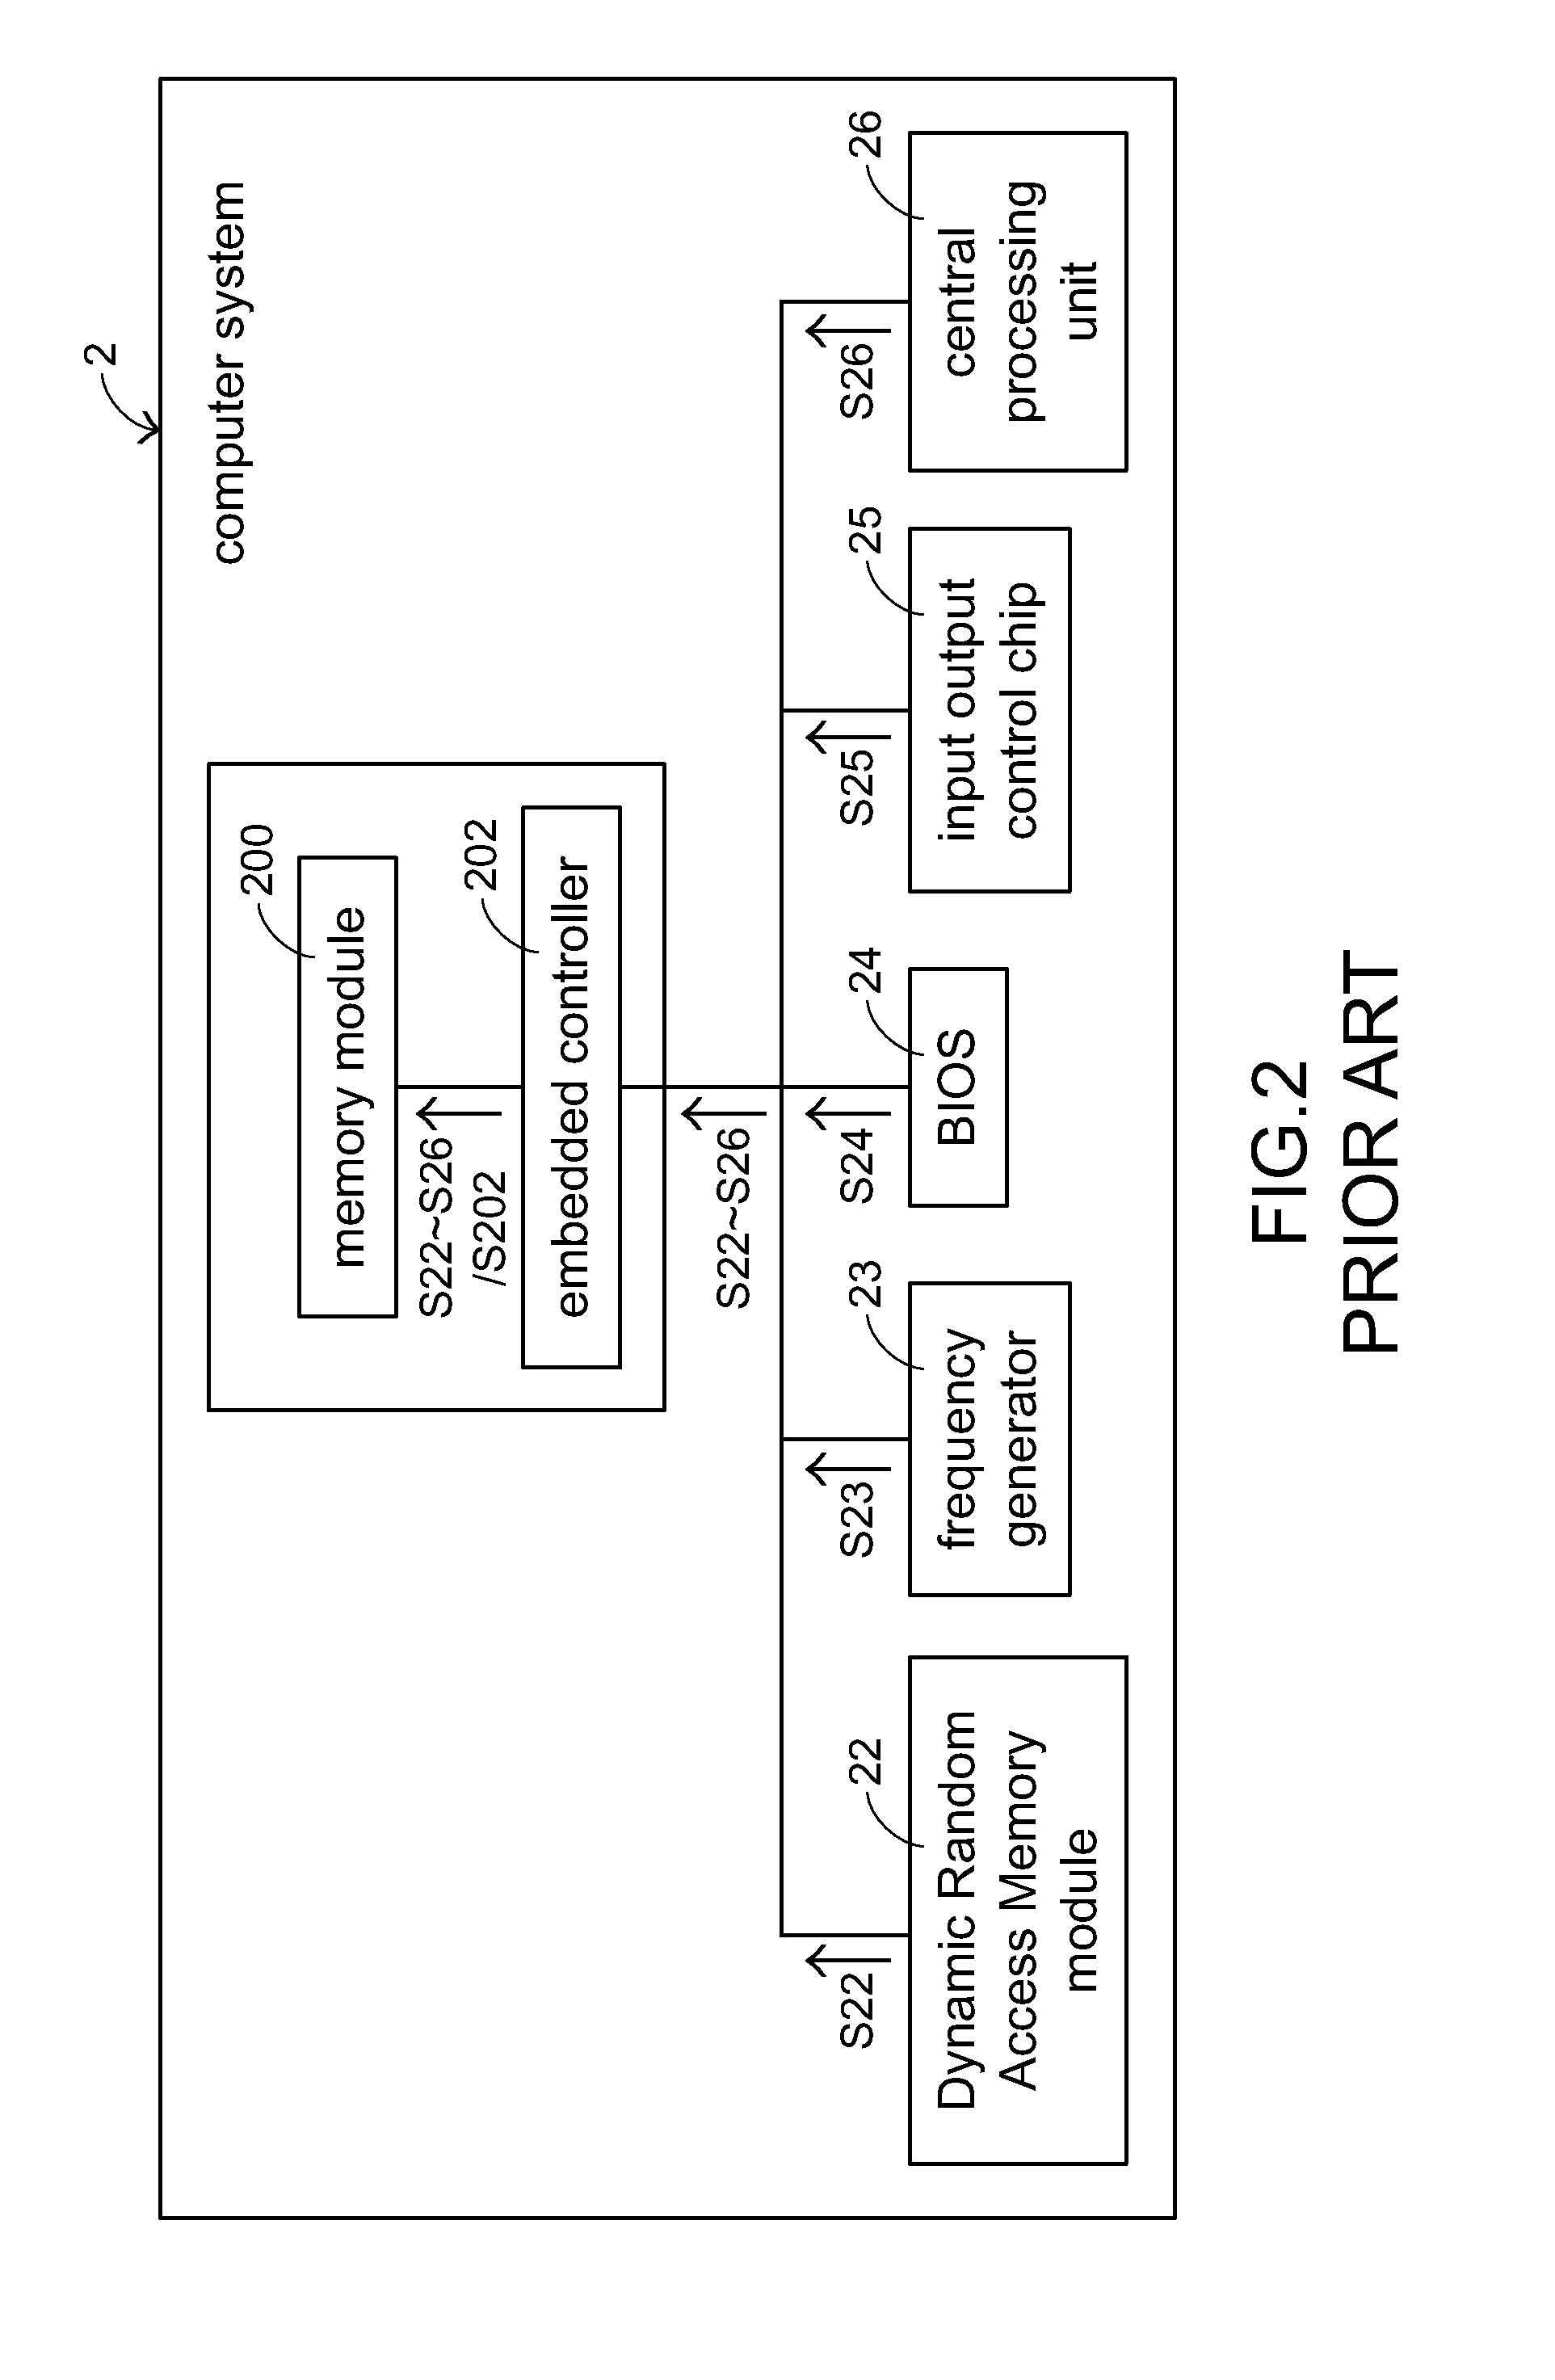 Service data record system and POS system with the same